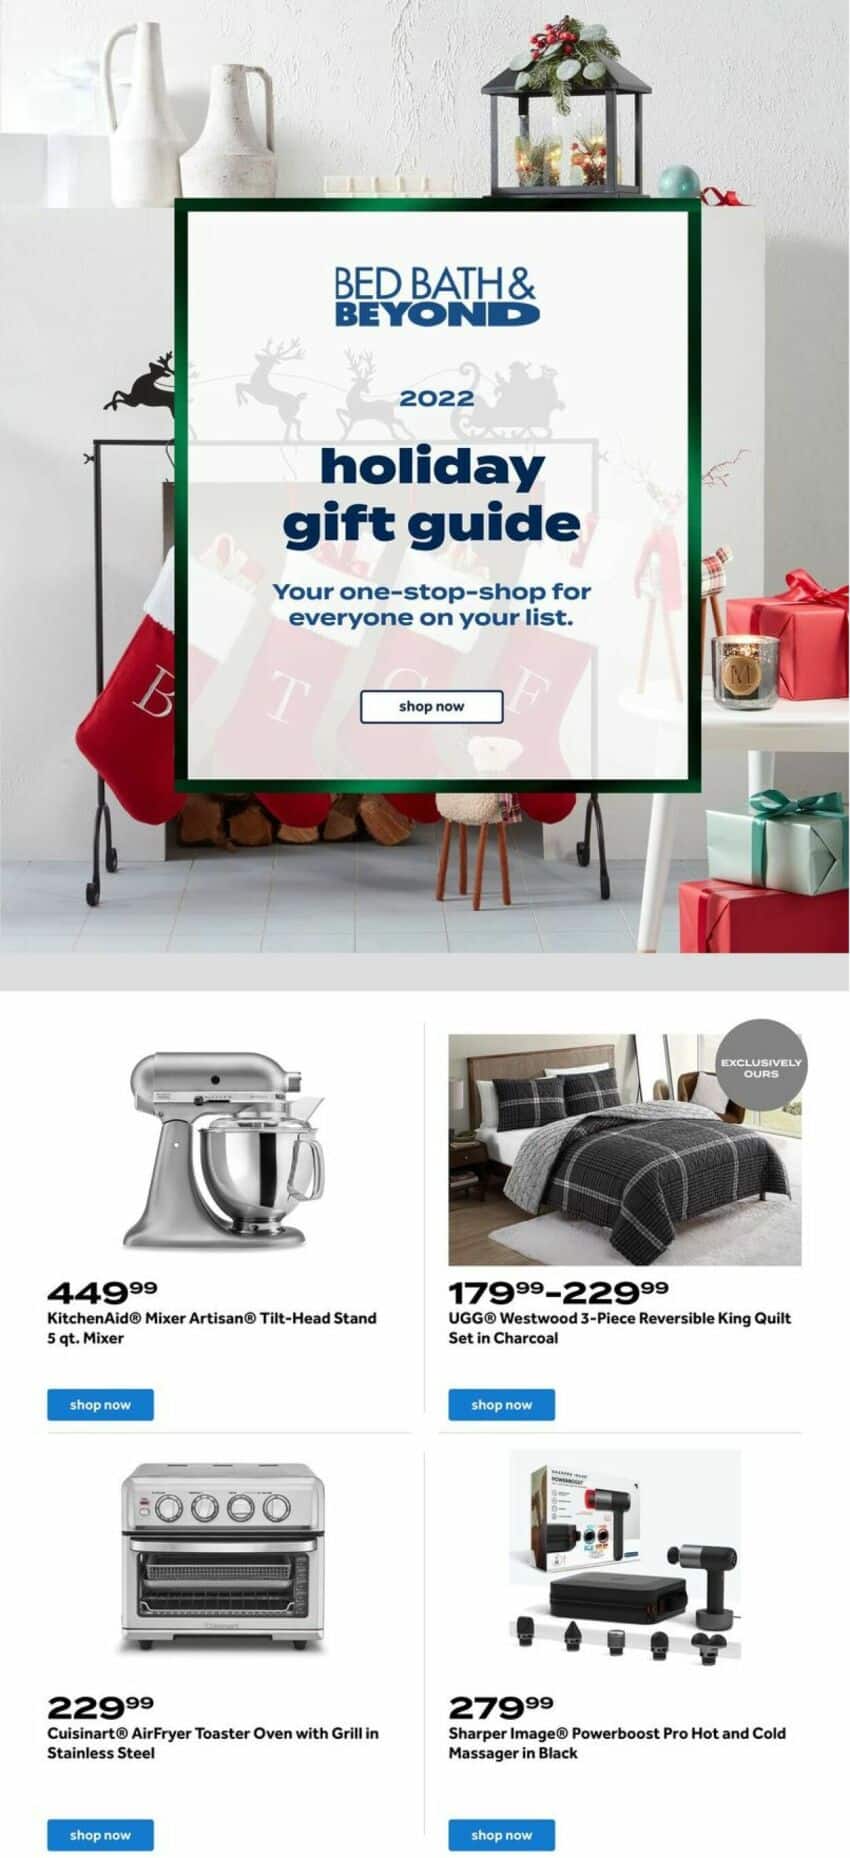 Bed Bath & Beyond Holiday Gift Guide 2022